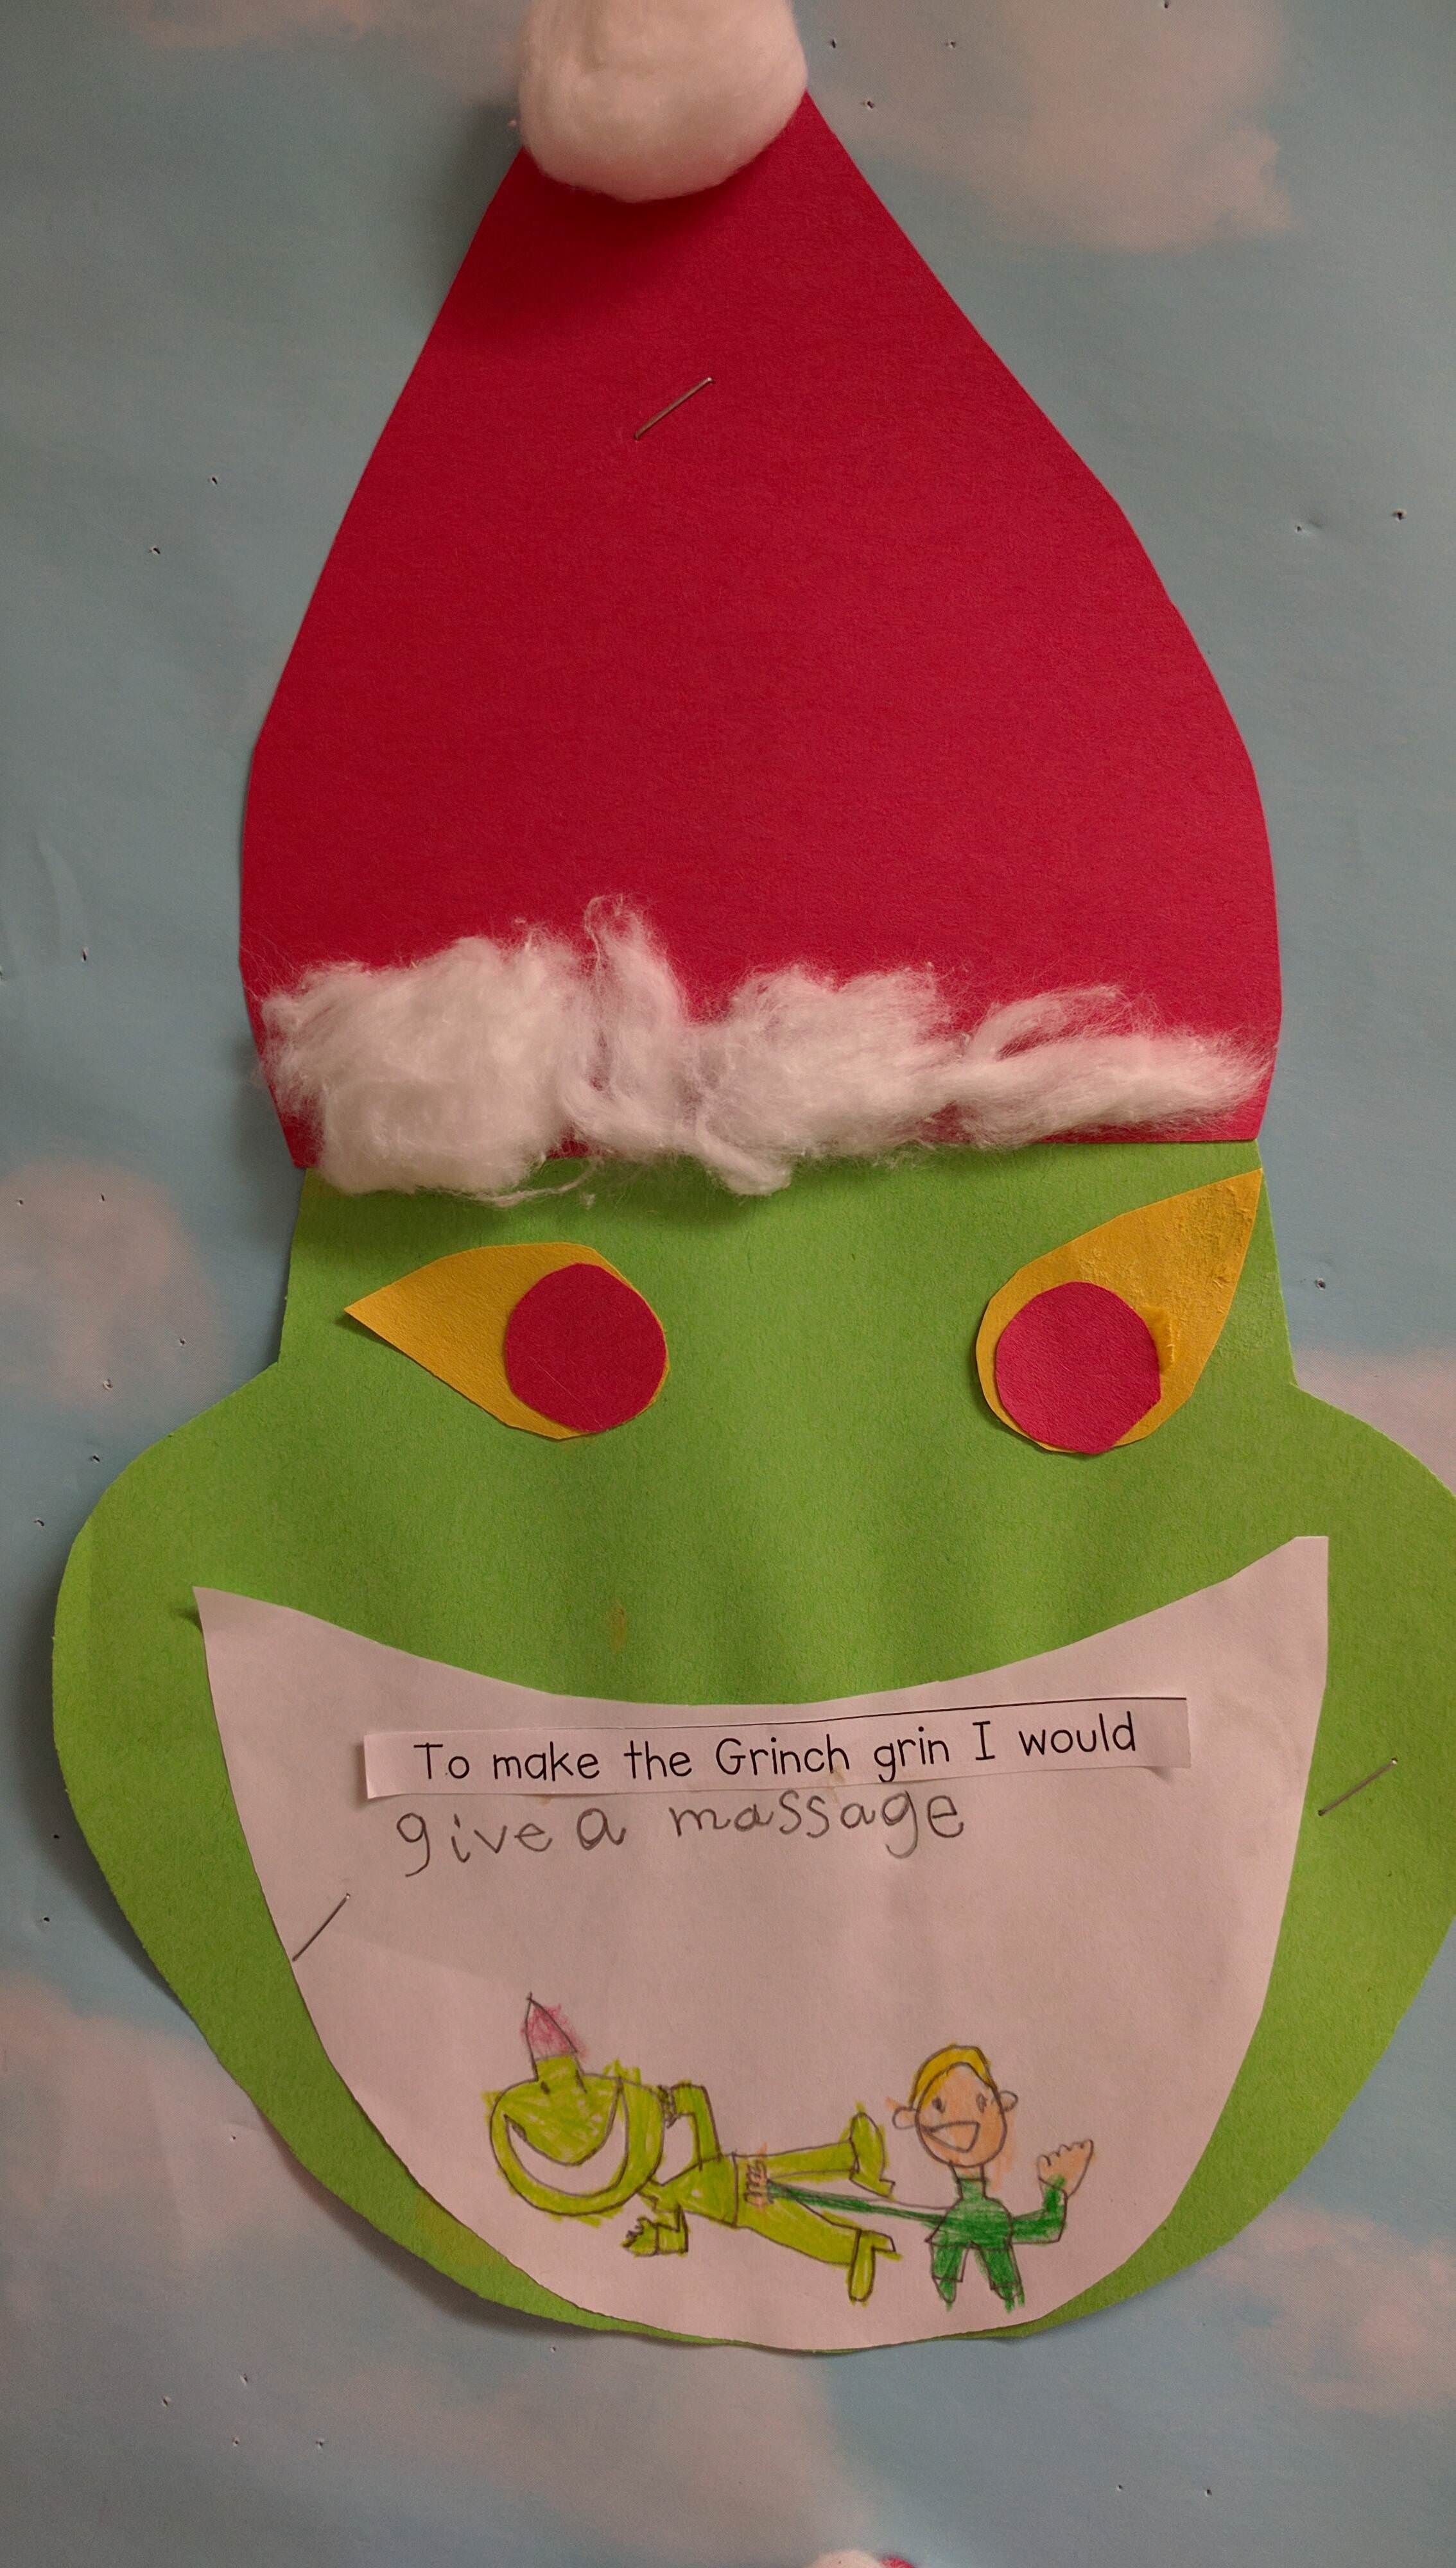 To make the Grinch happy I would...